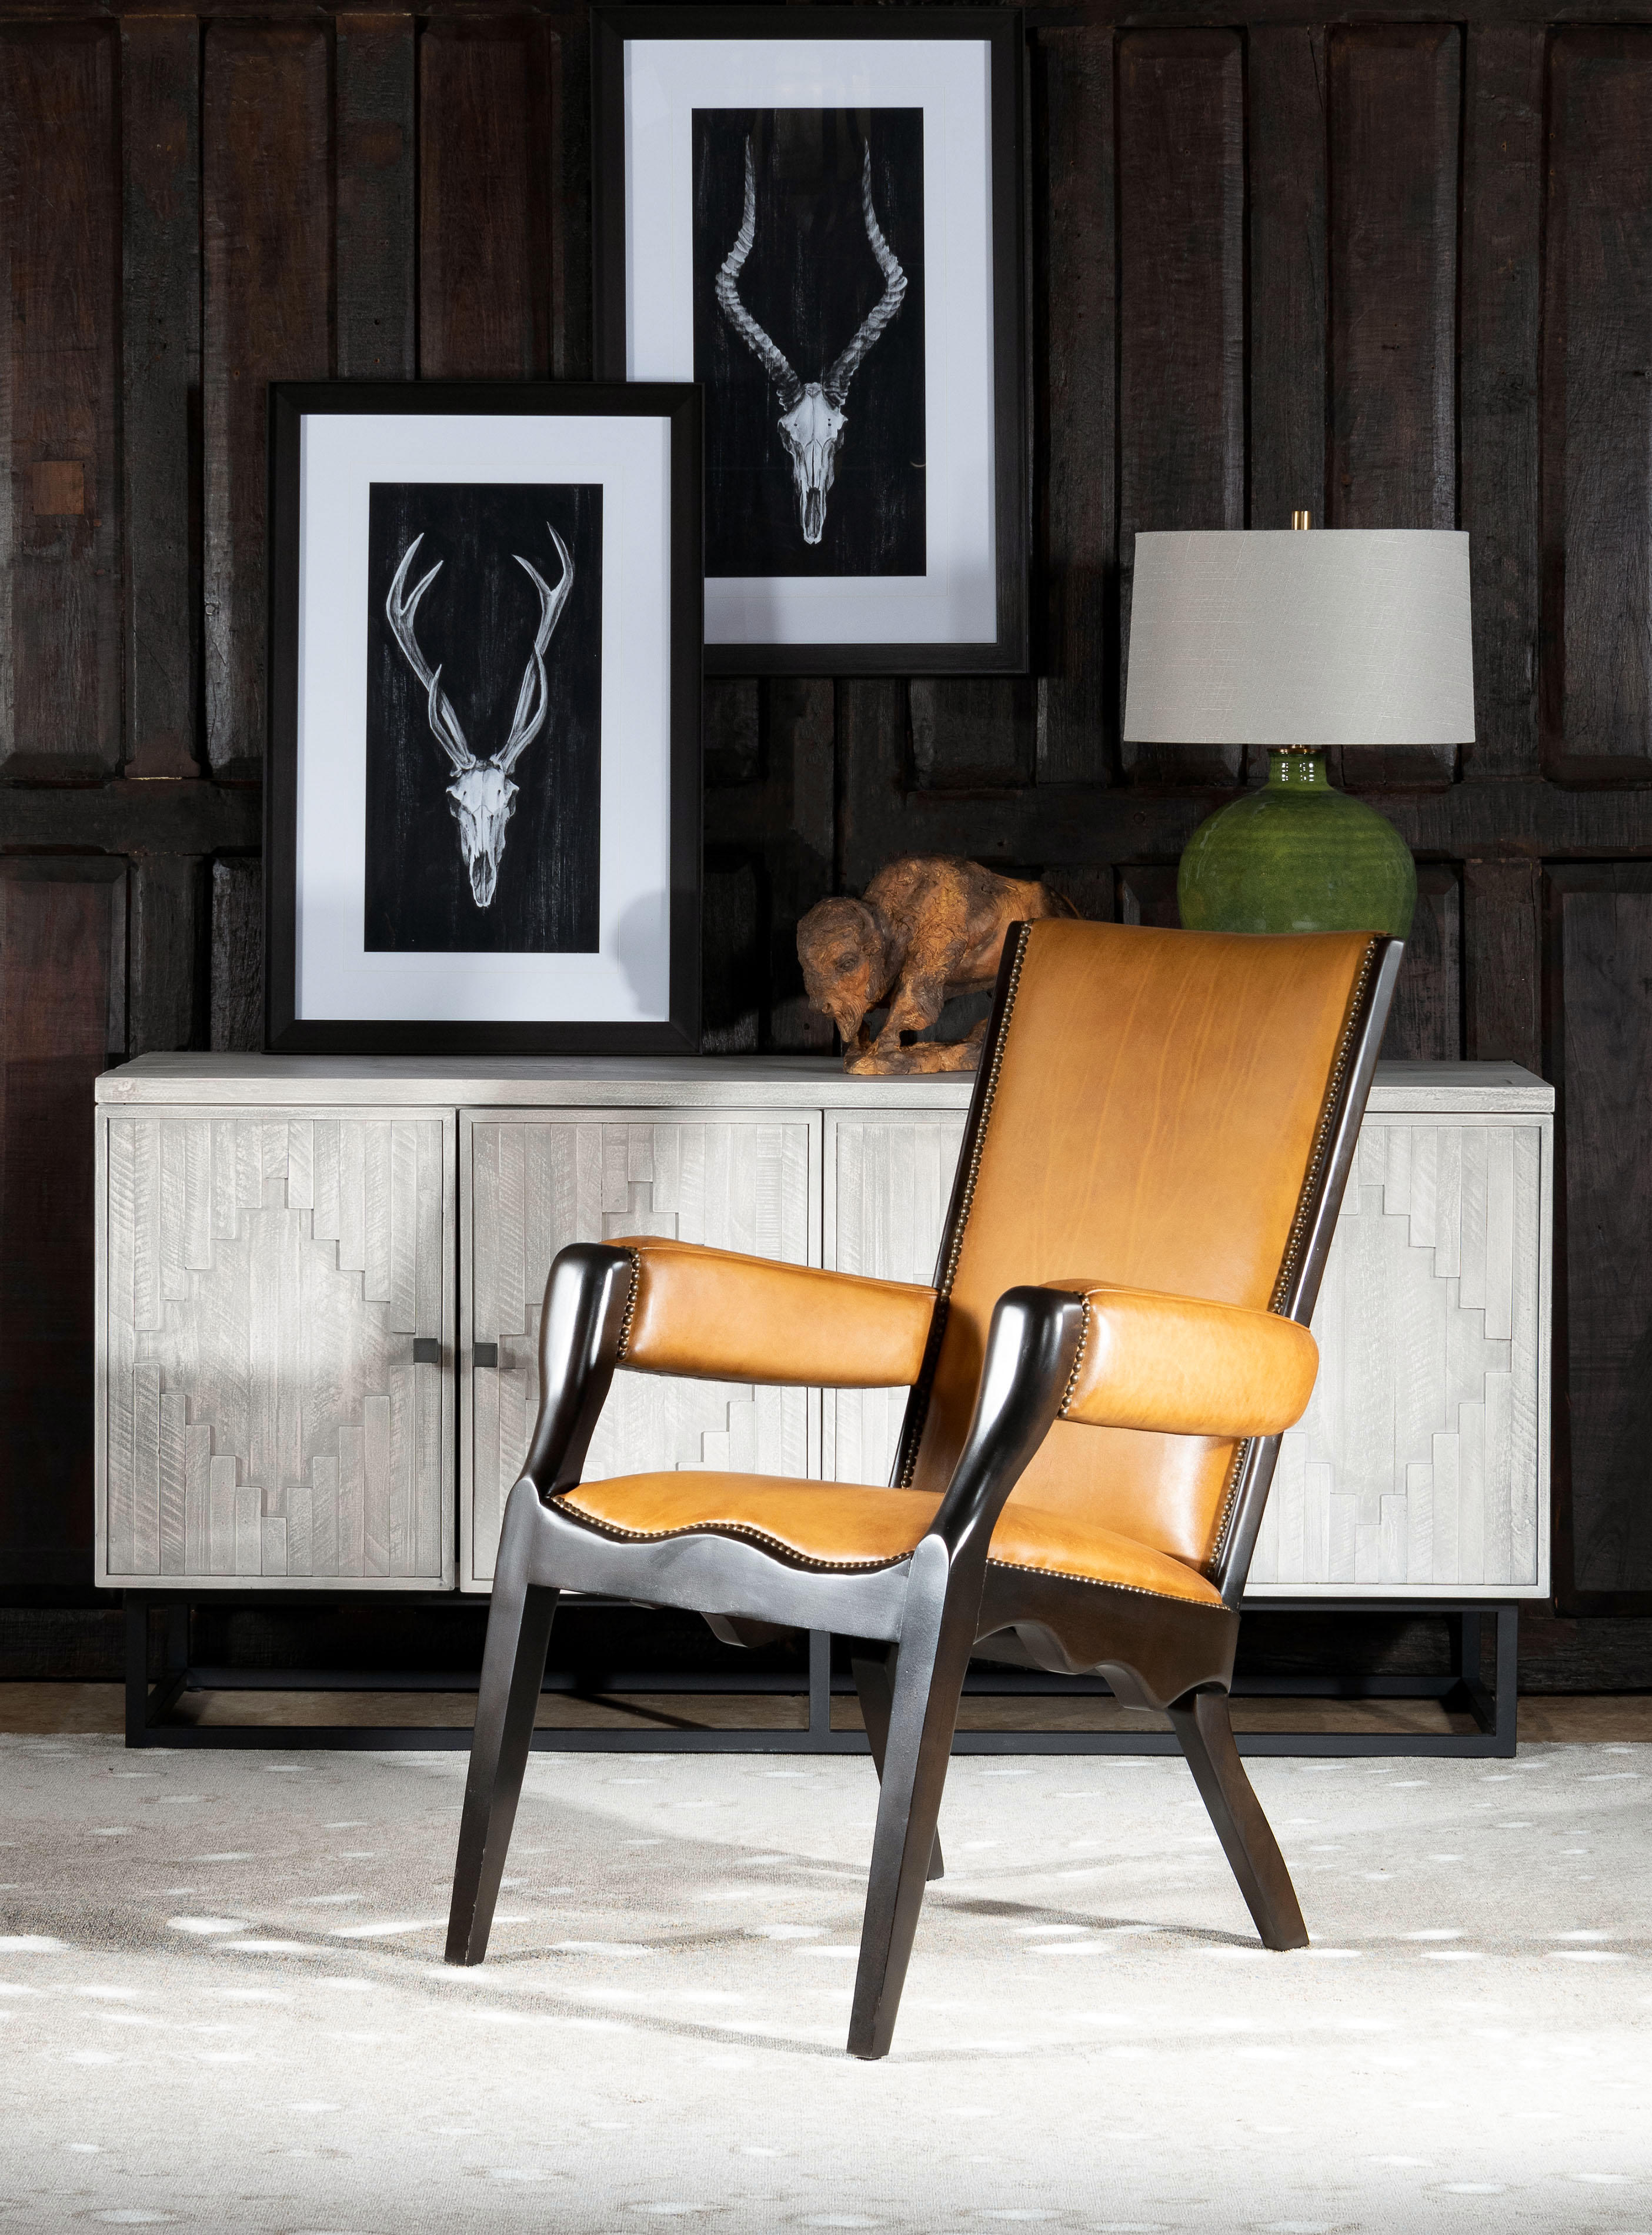 Our Boland Leather Chair is a fine example of modern rustic design. featuring an exceptional artisan leather tanned to the highest standards of quality and then hand antiqued. With Artisan craftsmanship and comfort, these appealing materials blend together to create a centerpiece of any fine deÌcor scheme. This fine leather chair has the perfect pitch for incredible comfort! Our Boland Leather Chair is one of the most eye-catching pieces of modern rustic furniture you will find! 100% American Made to the highest standards of quality and craftsmanship!